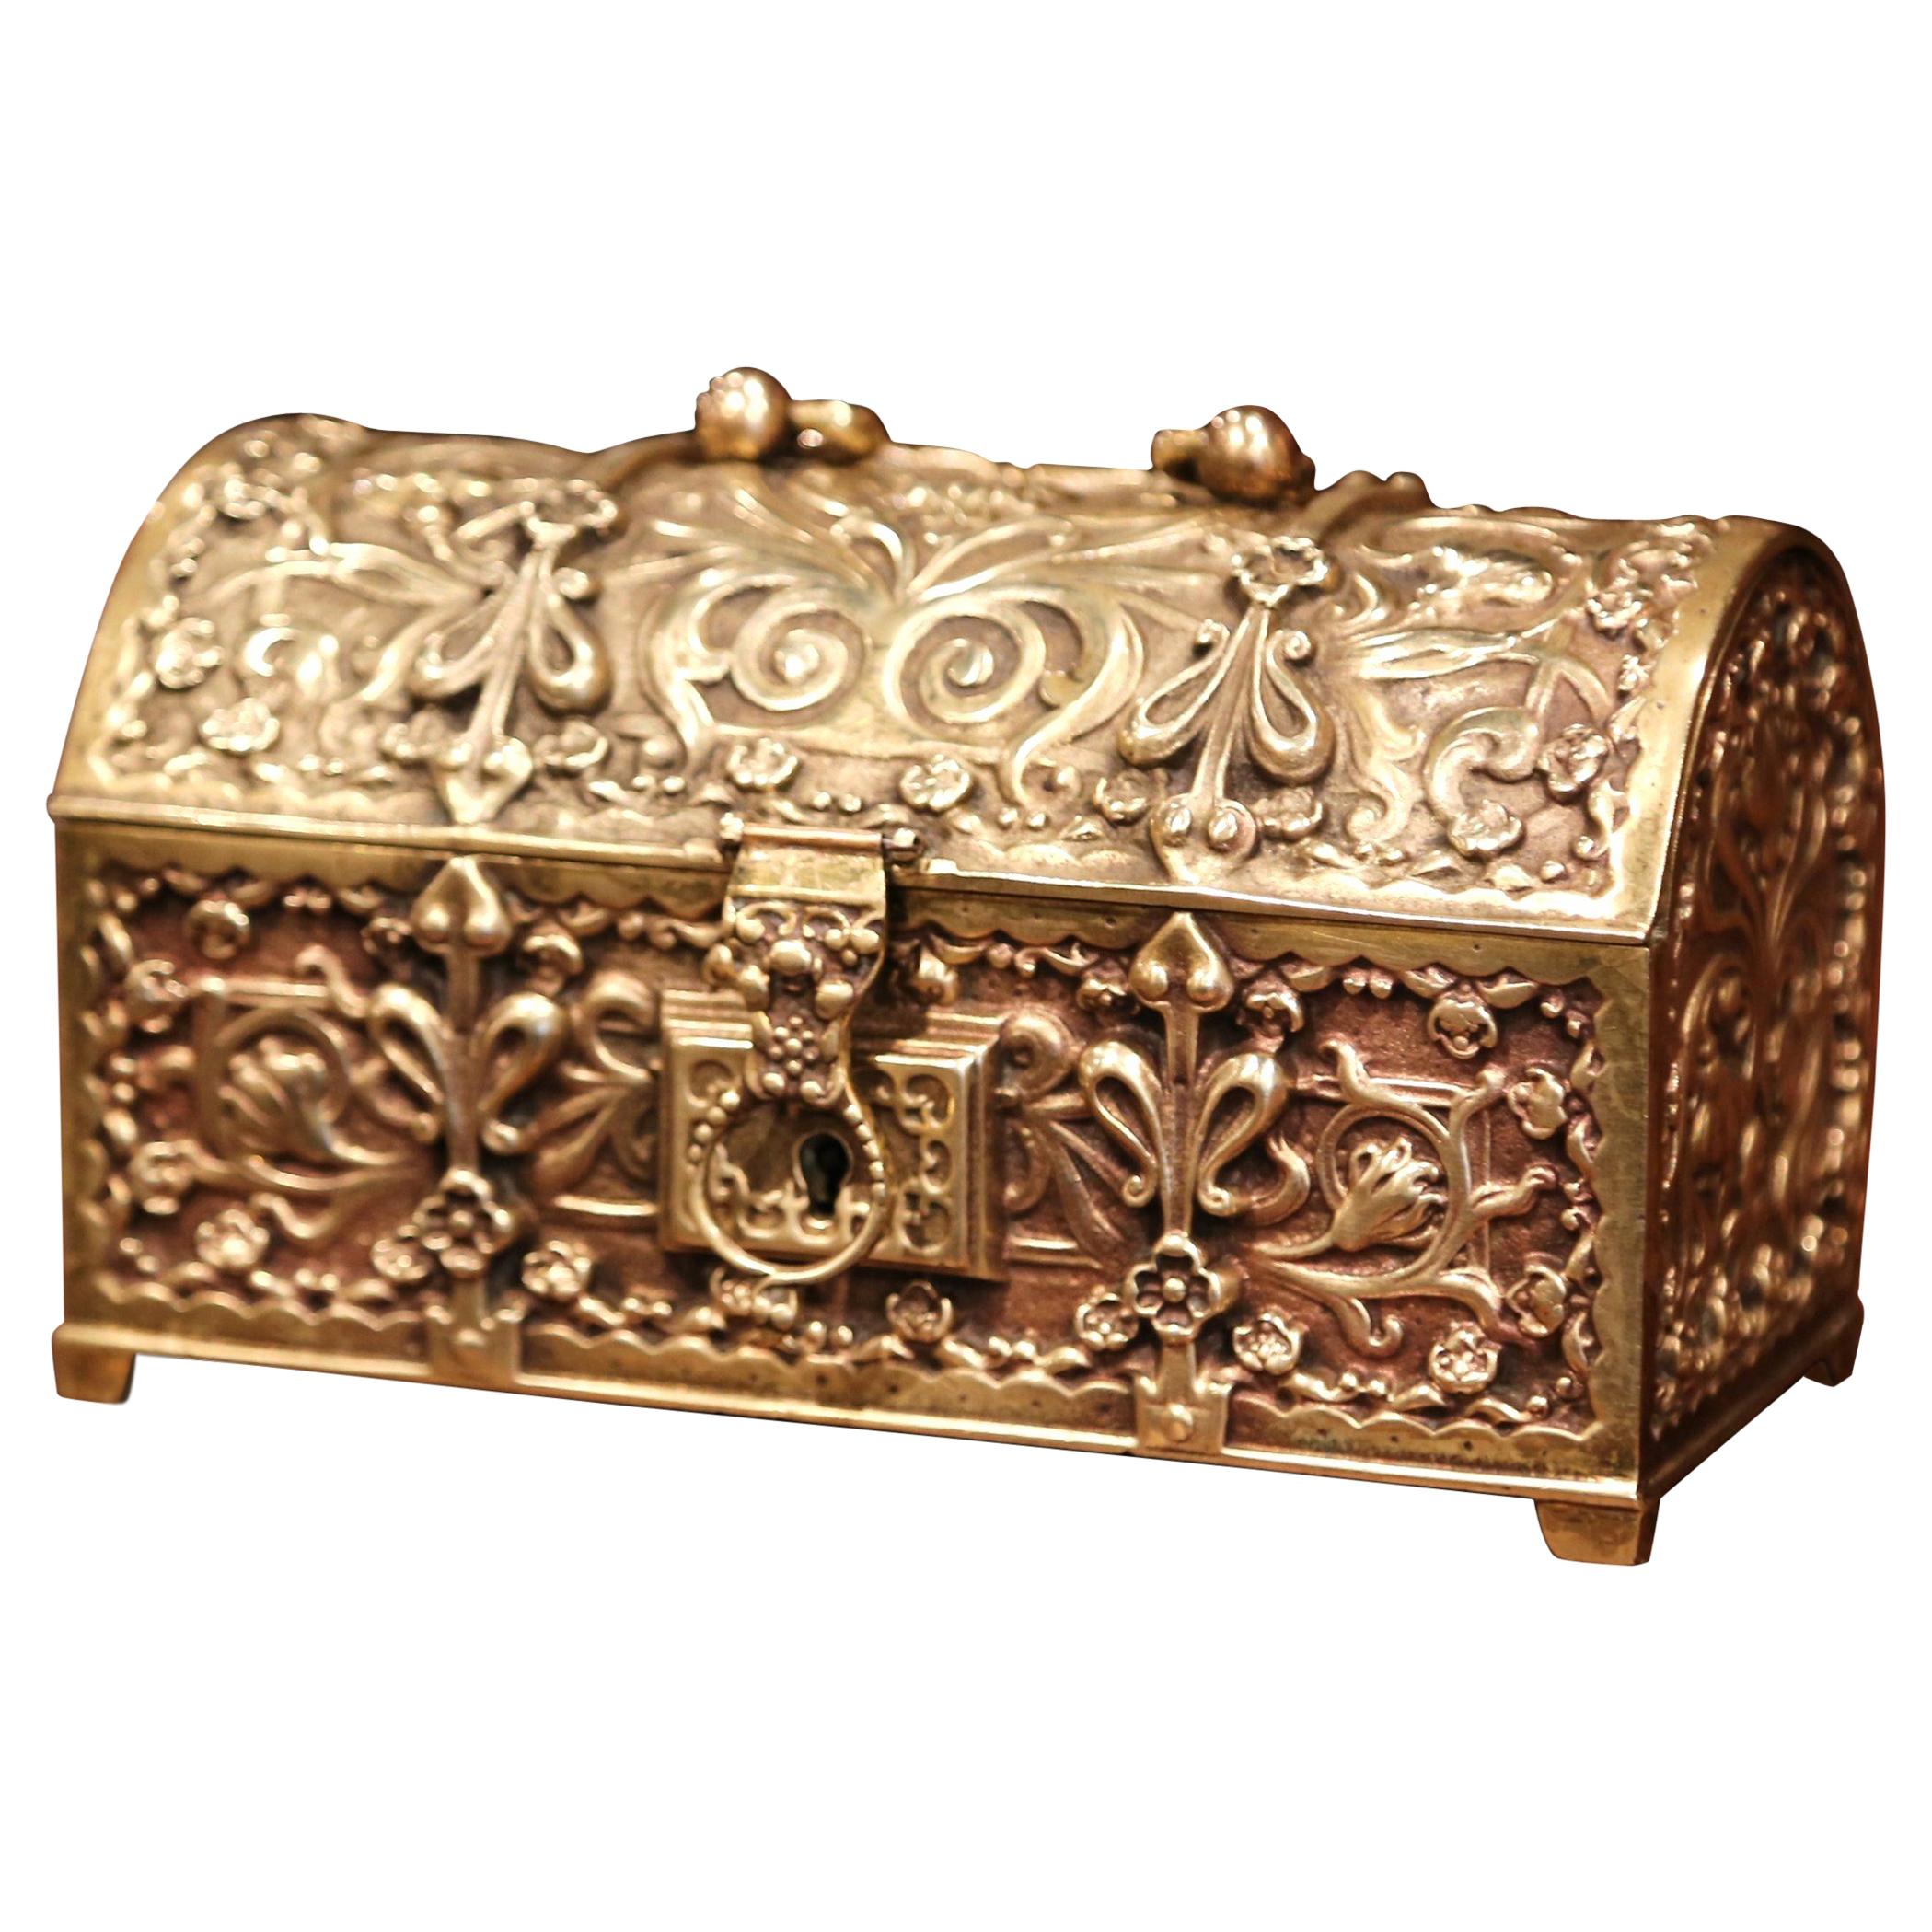 19th Century French Gothic Bombe Bronze Doré Jewelry Box with Floral Motifs